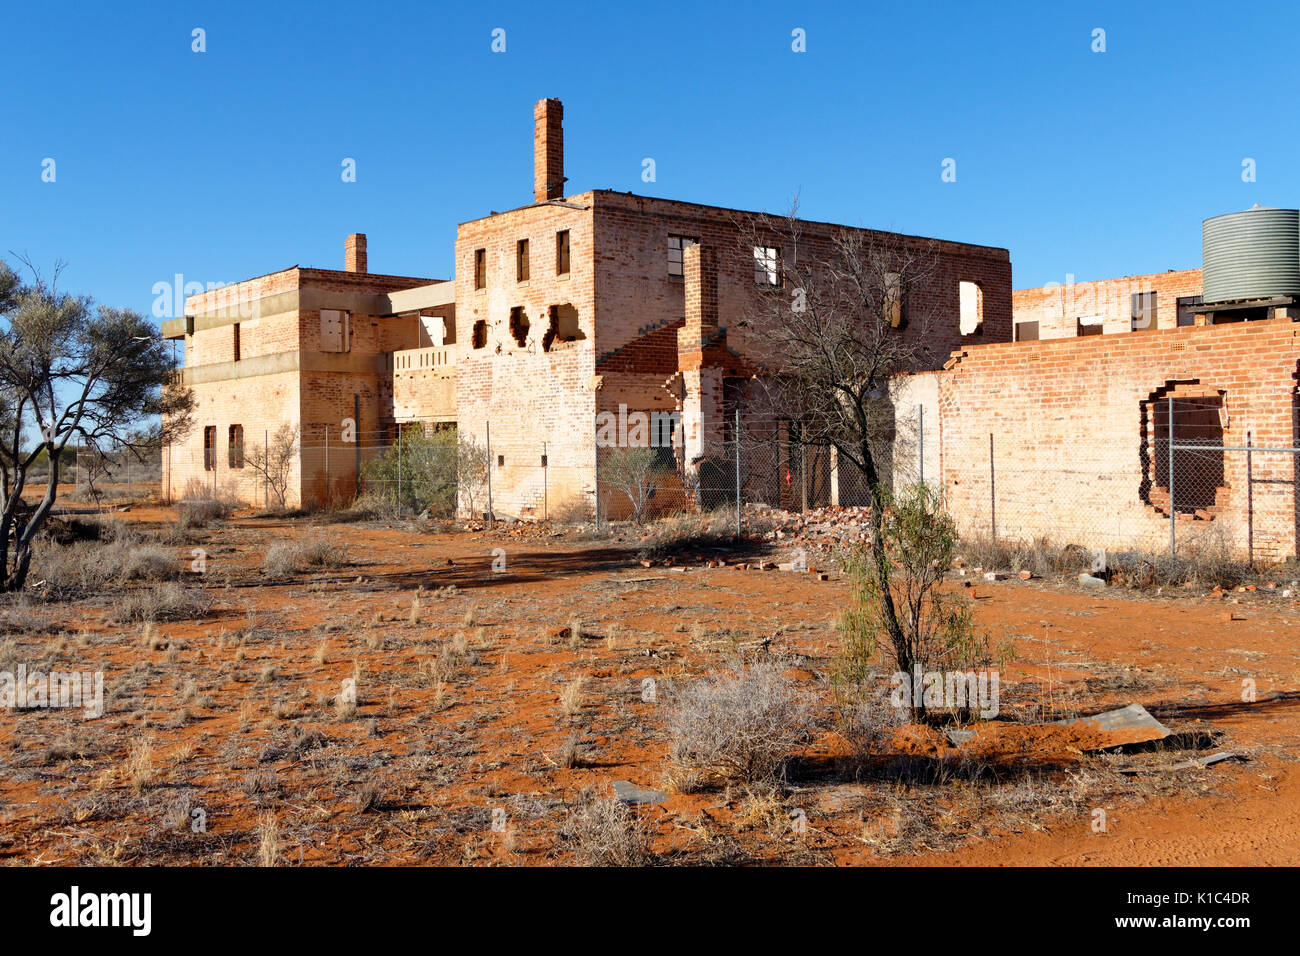 Big Bell Hotel, remains of the historic Big Bell gold township of 1936, Cue, Murchison, Western Australia Stock Photo